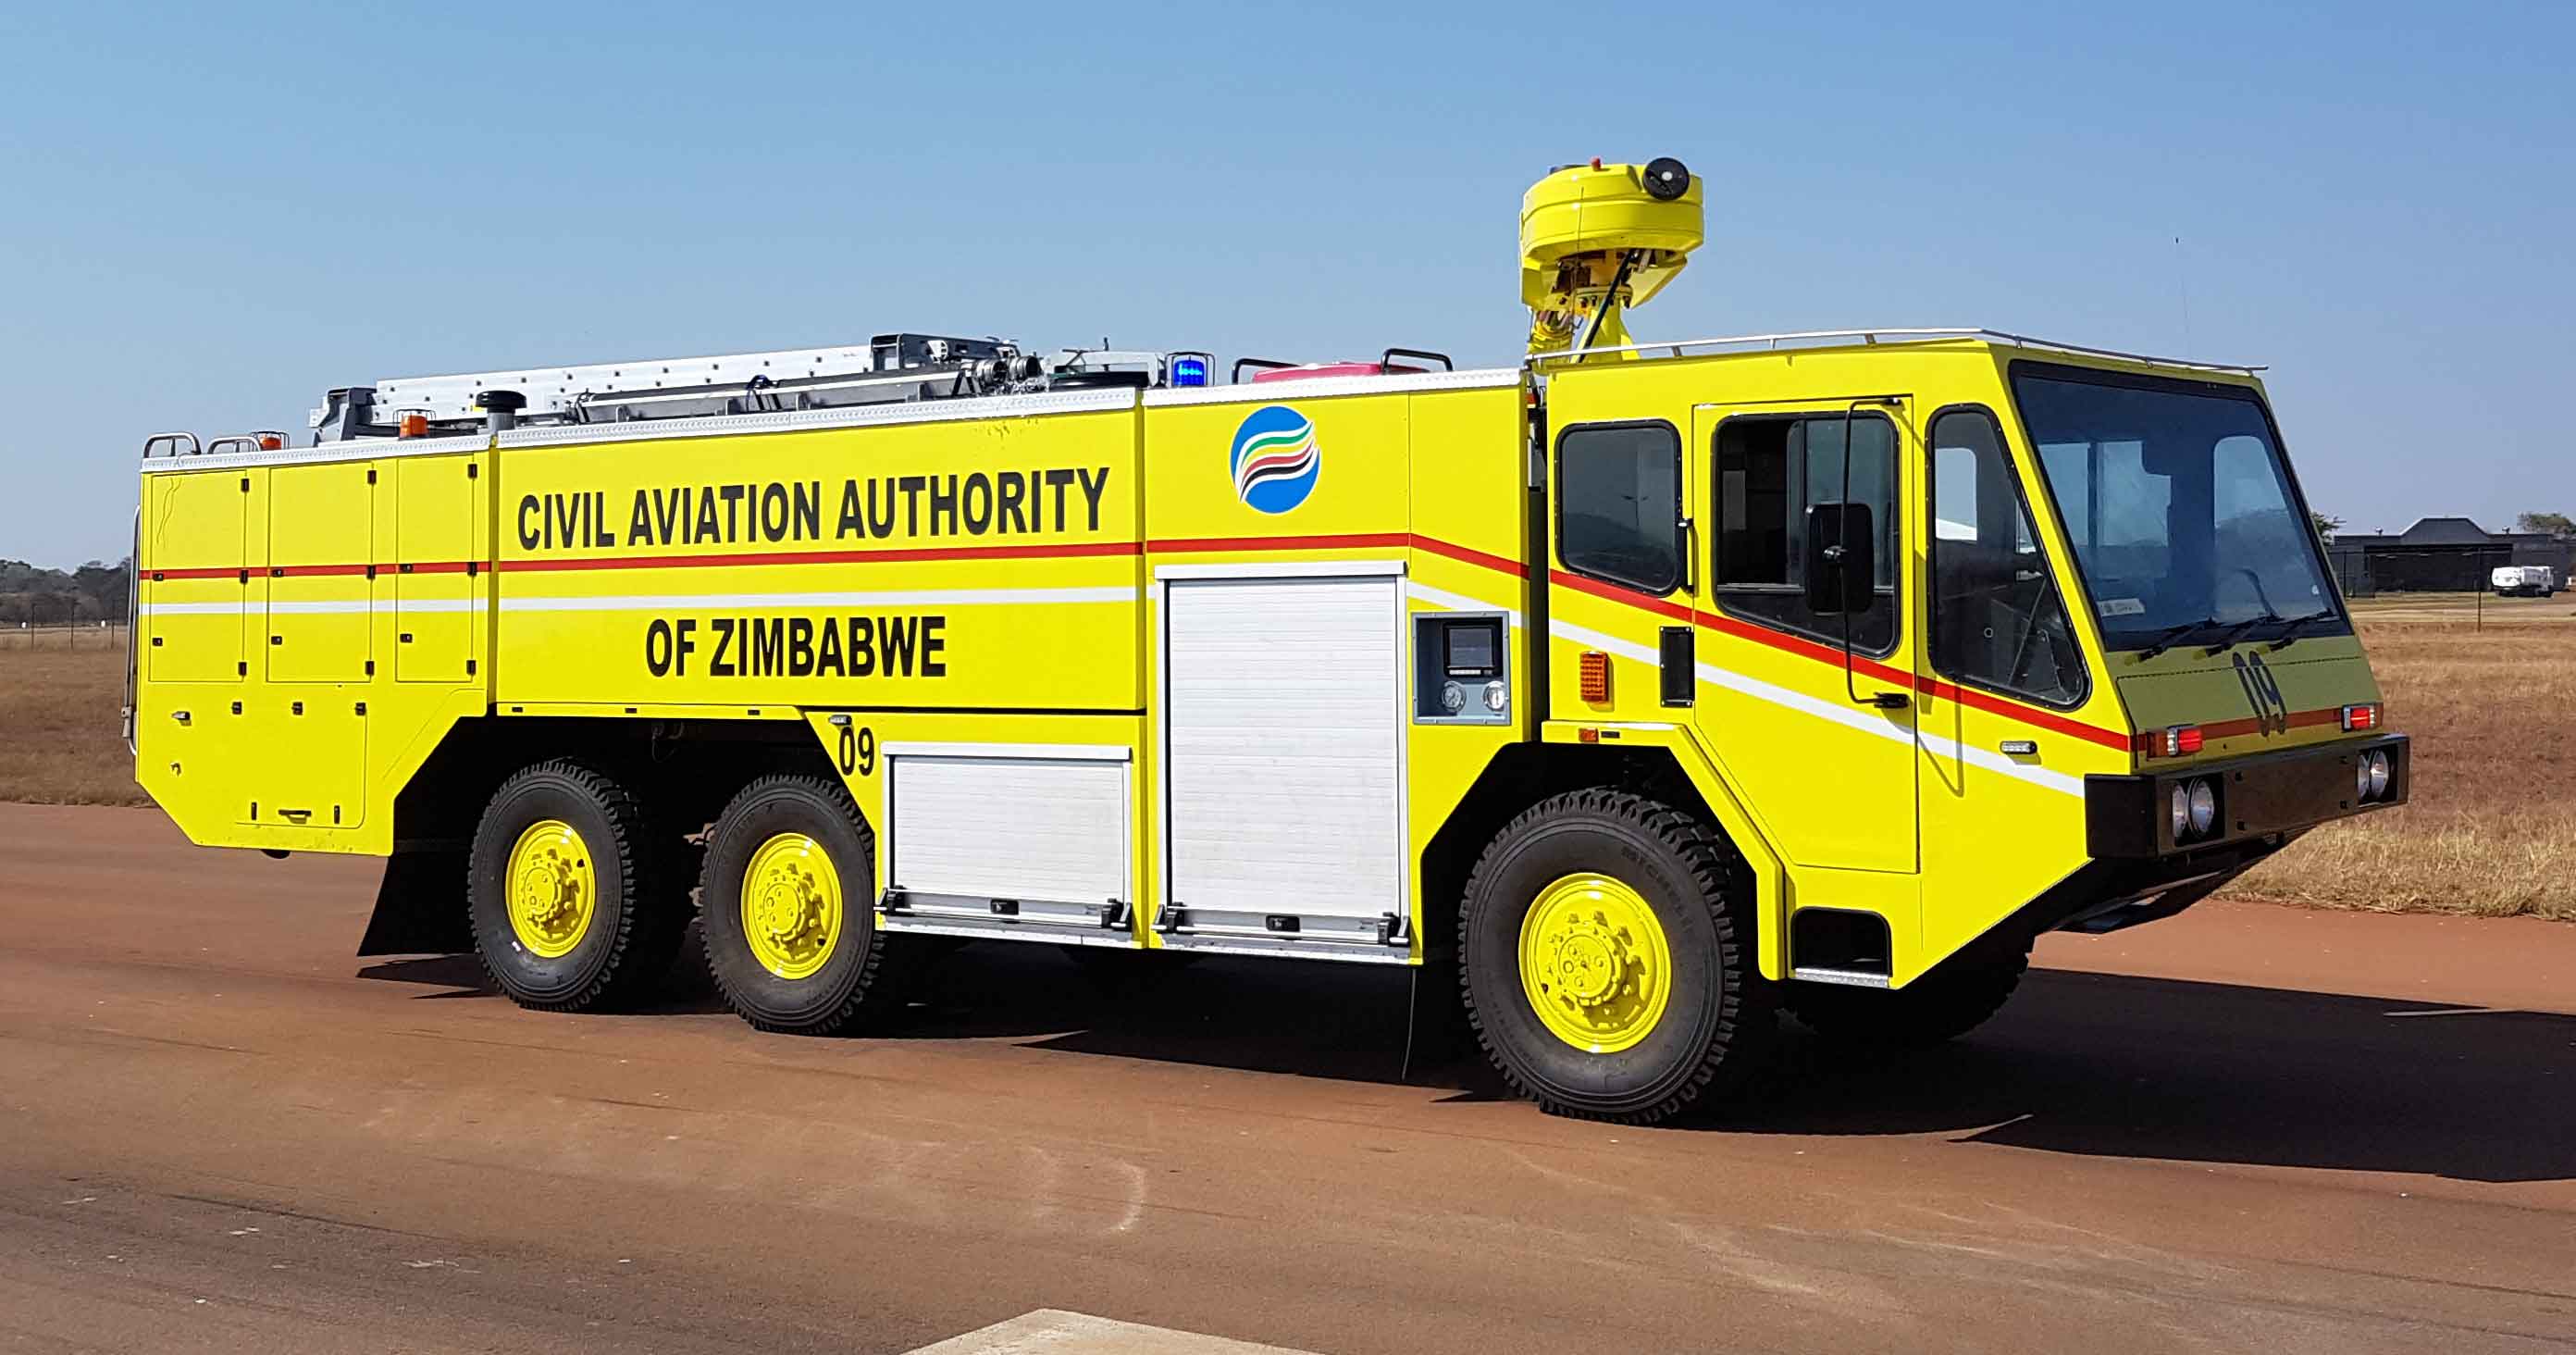 Zim aviation well equipped for emergencies